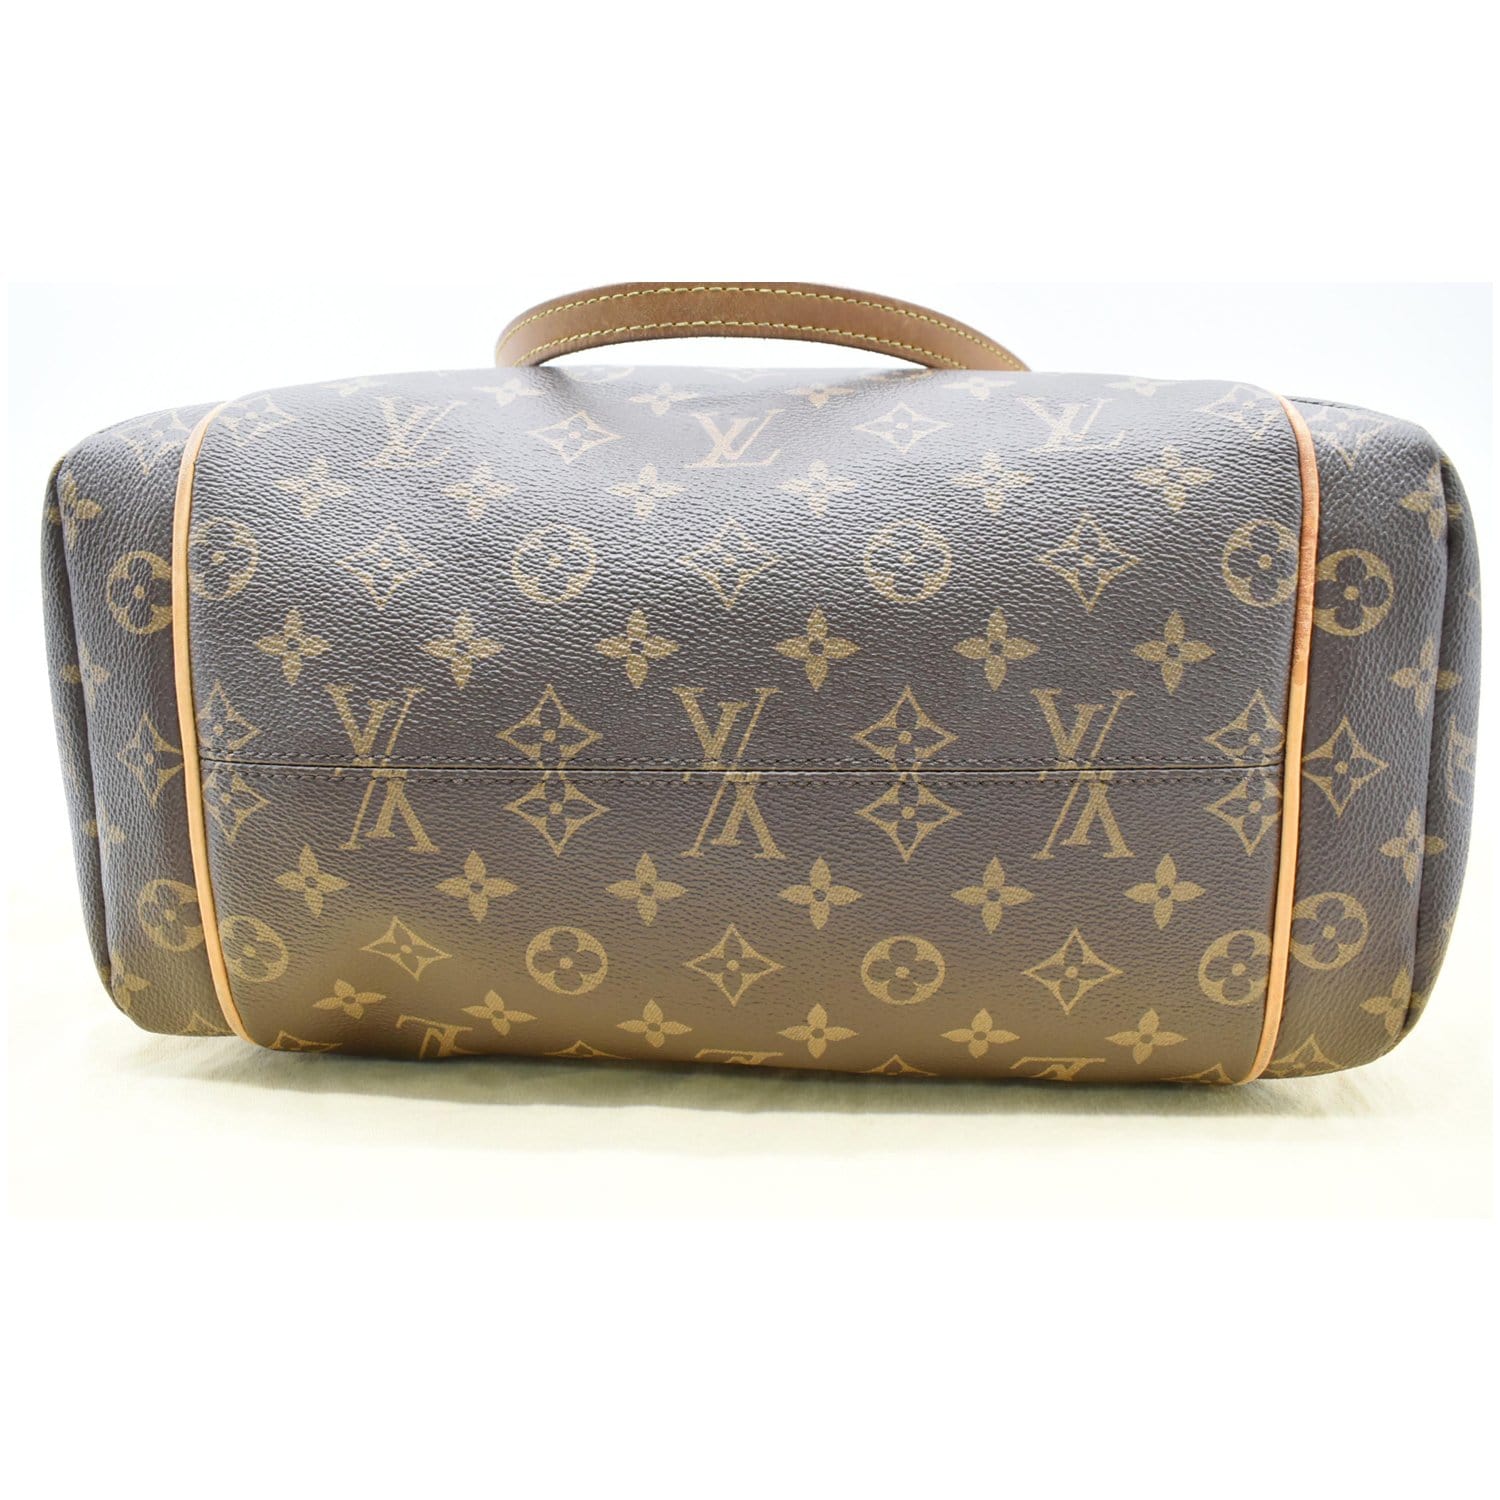 Louis Vuitton Monogram Canvas And Leather Totally MM Bag Louis Vuitton